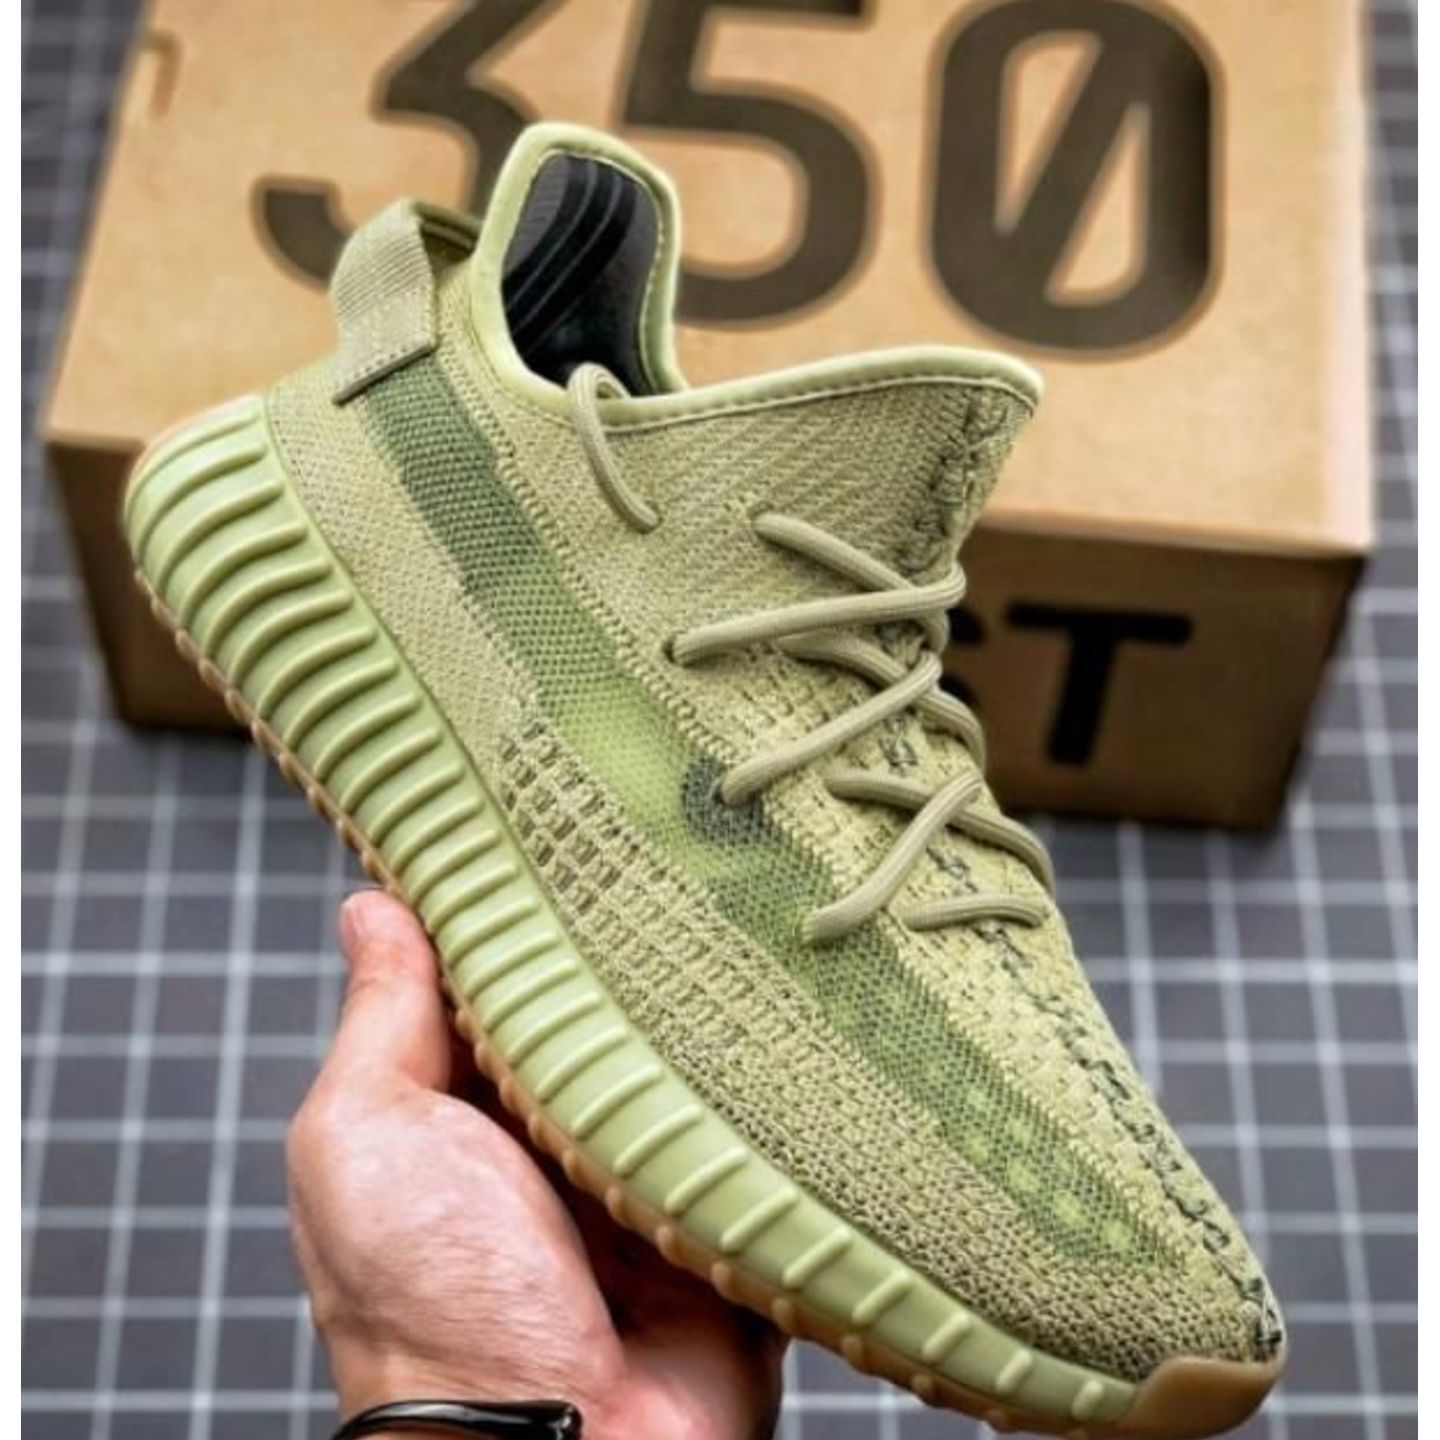 Insta Shoppee Adidass Yeezy Boost 350 V2 Sulfur First Copy Sneaker